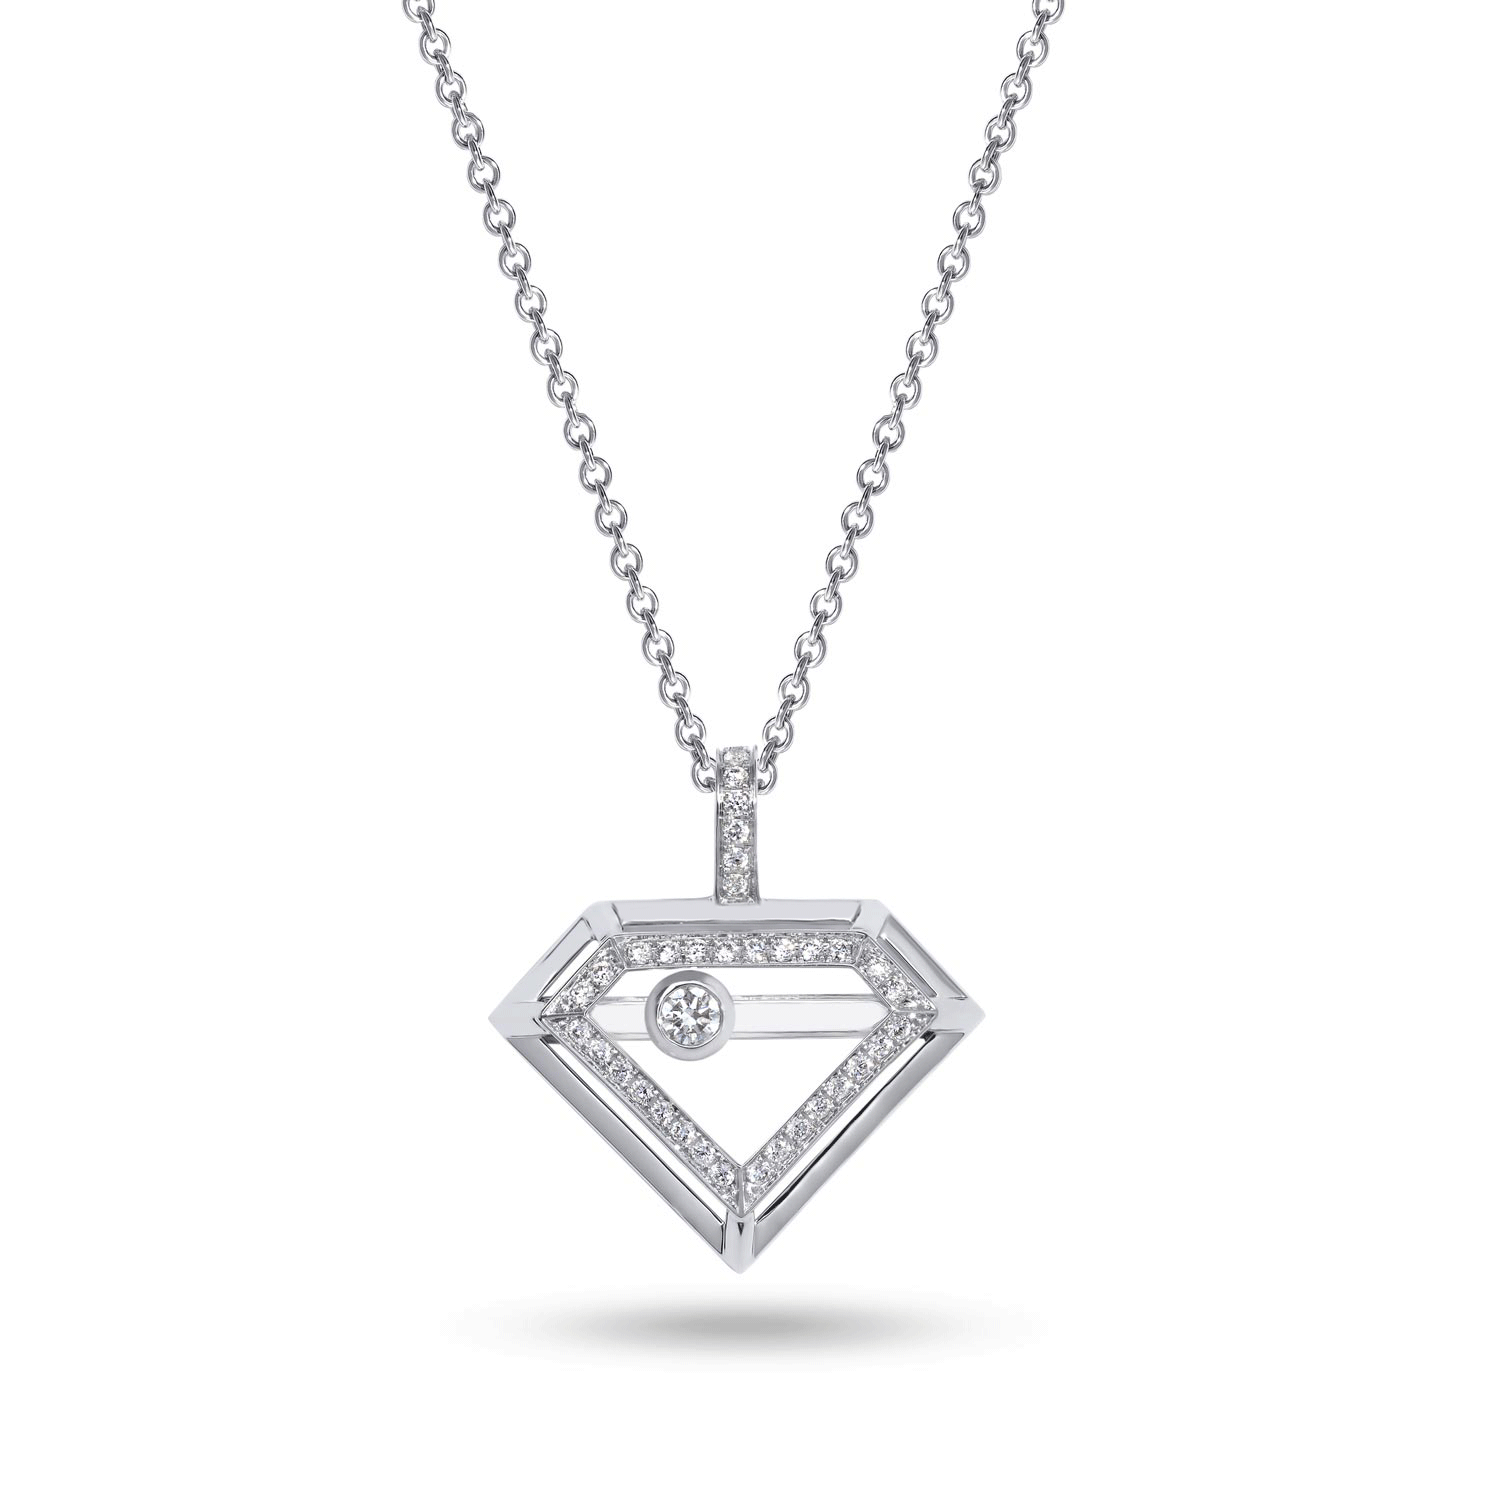 YOU MOVE ME All Diamond Necklace